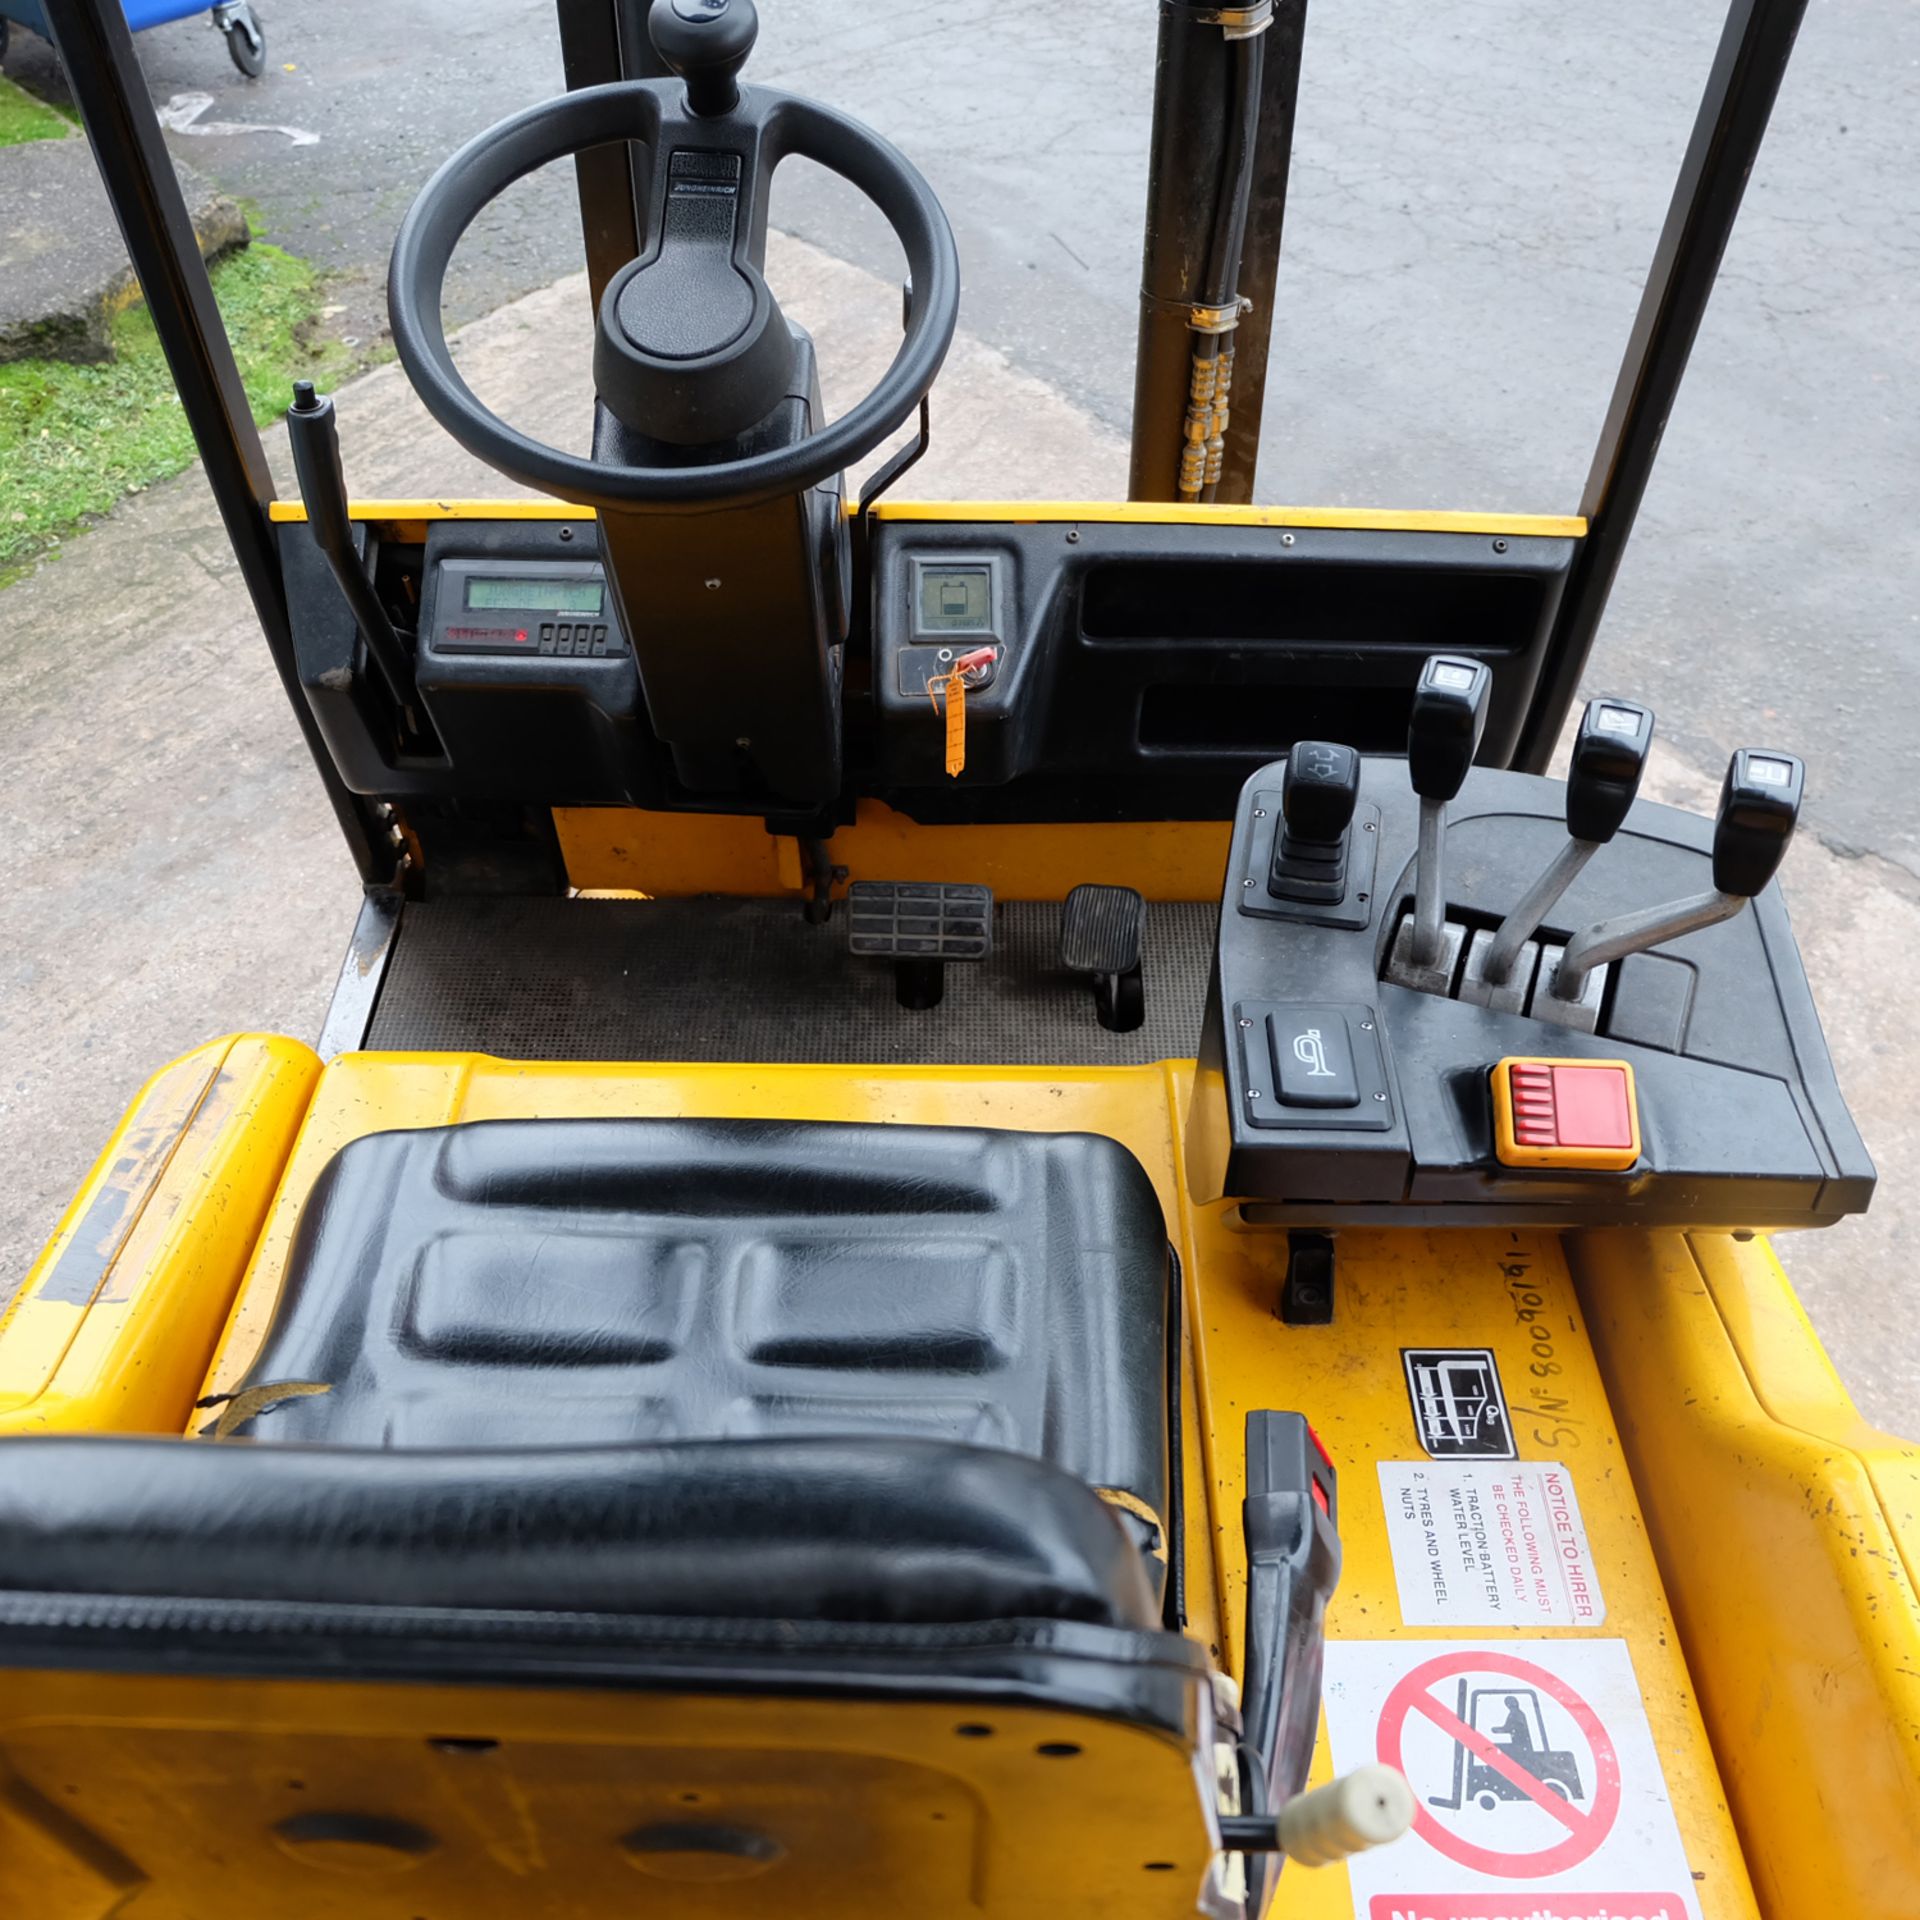 Jungheinrich 1800kg 3 Wheel Electric Forklift Truck with Charger. (1997) - Image 7 of 16